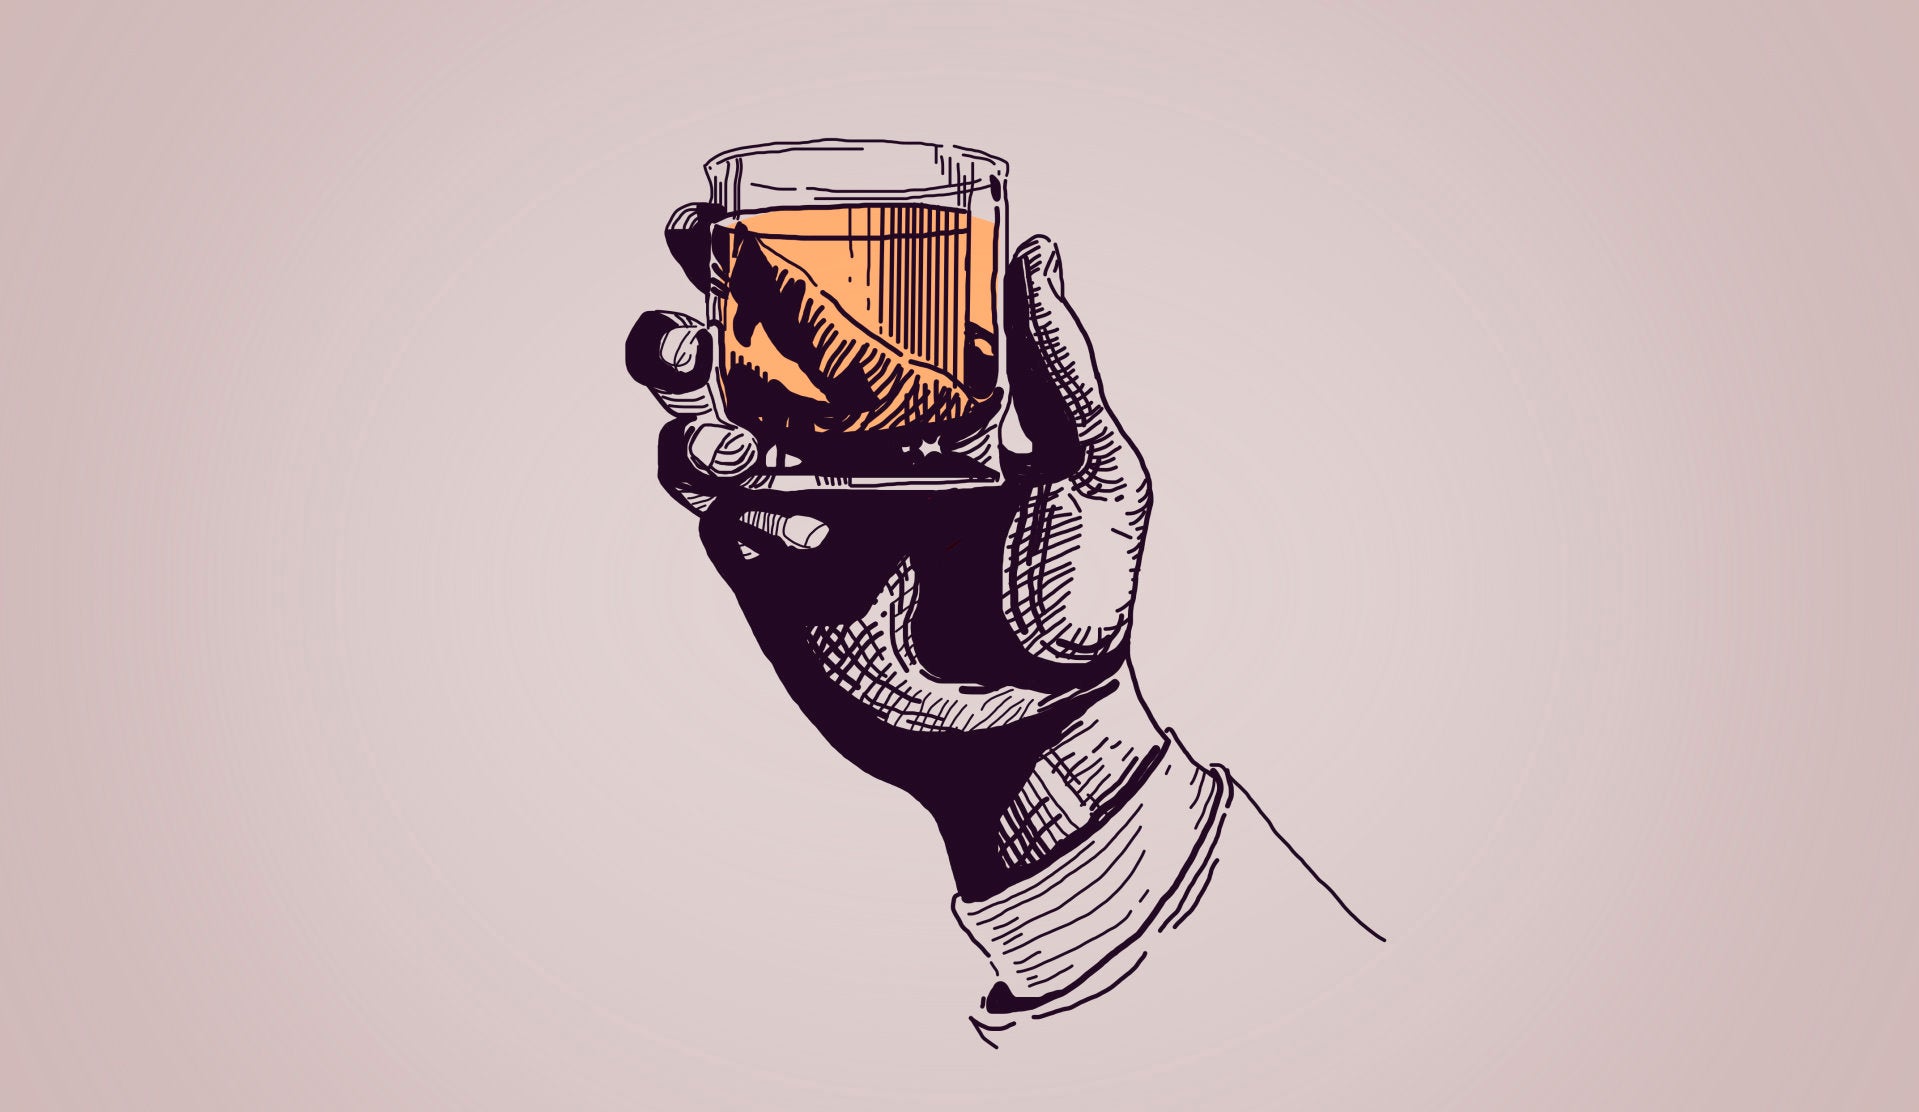 Whiskey Etiquette: How to Drink Whiskey Properly